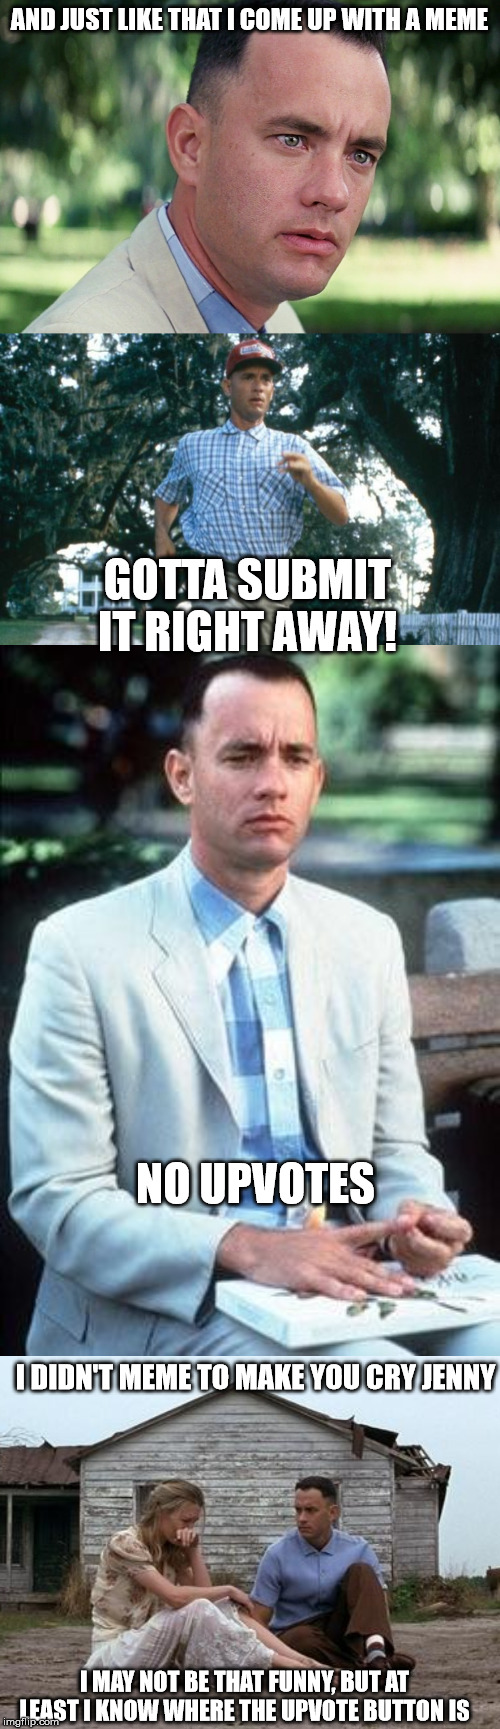 AND JUST LIKE THAT I COME UP WITH A MEME; GOTTA SUBMIT IT RIGHT AWAY! NO UPVOTES; I DIDN'T MEME TO MAKE YOU CRY JENNY; I MAY NOT BE THAT FUNNY, BUT AT LEAST I KNOW WHERE THE UPVOTE BUTTON IS | image tagged in forrest gump and jenny,forest gump,run forrest run,memes,and just like that | made w/ Imgflip meme maker